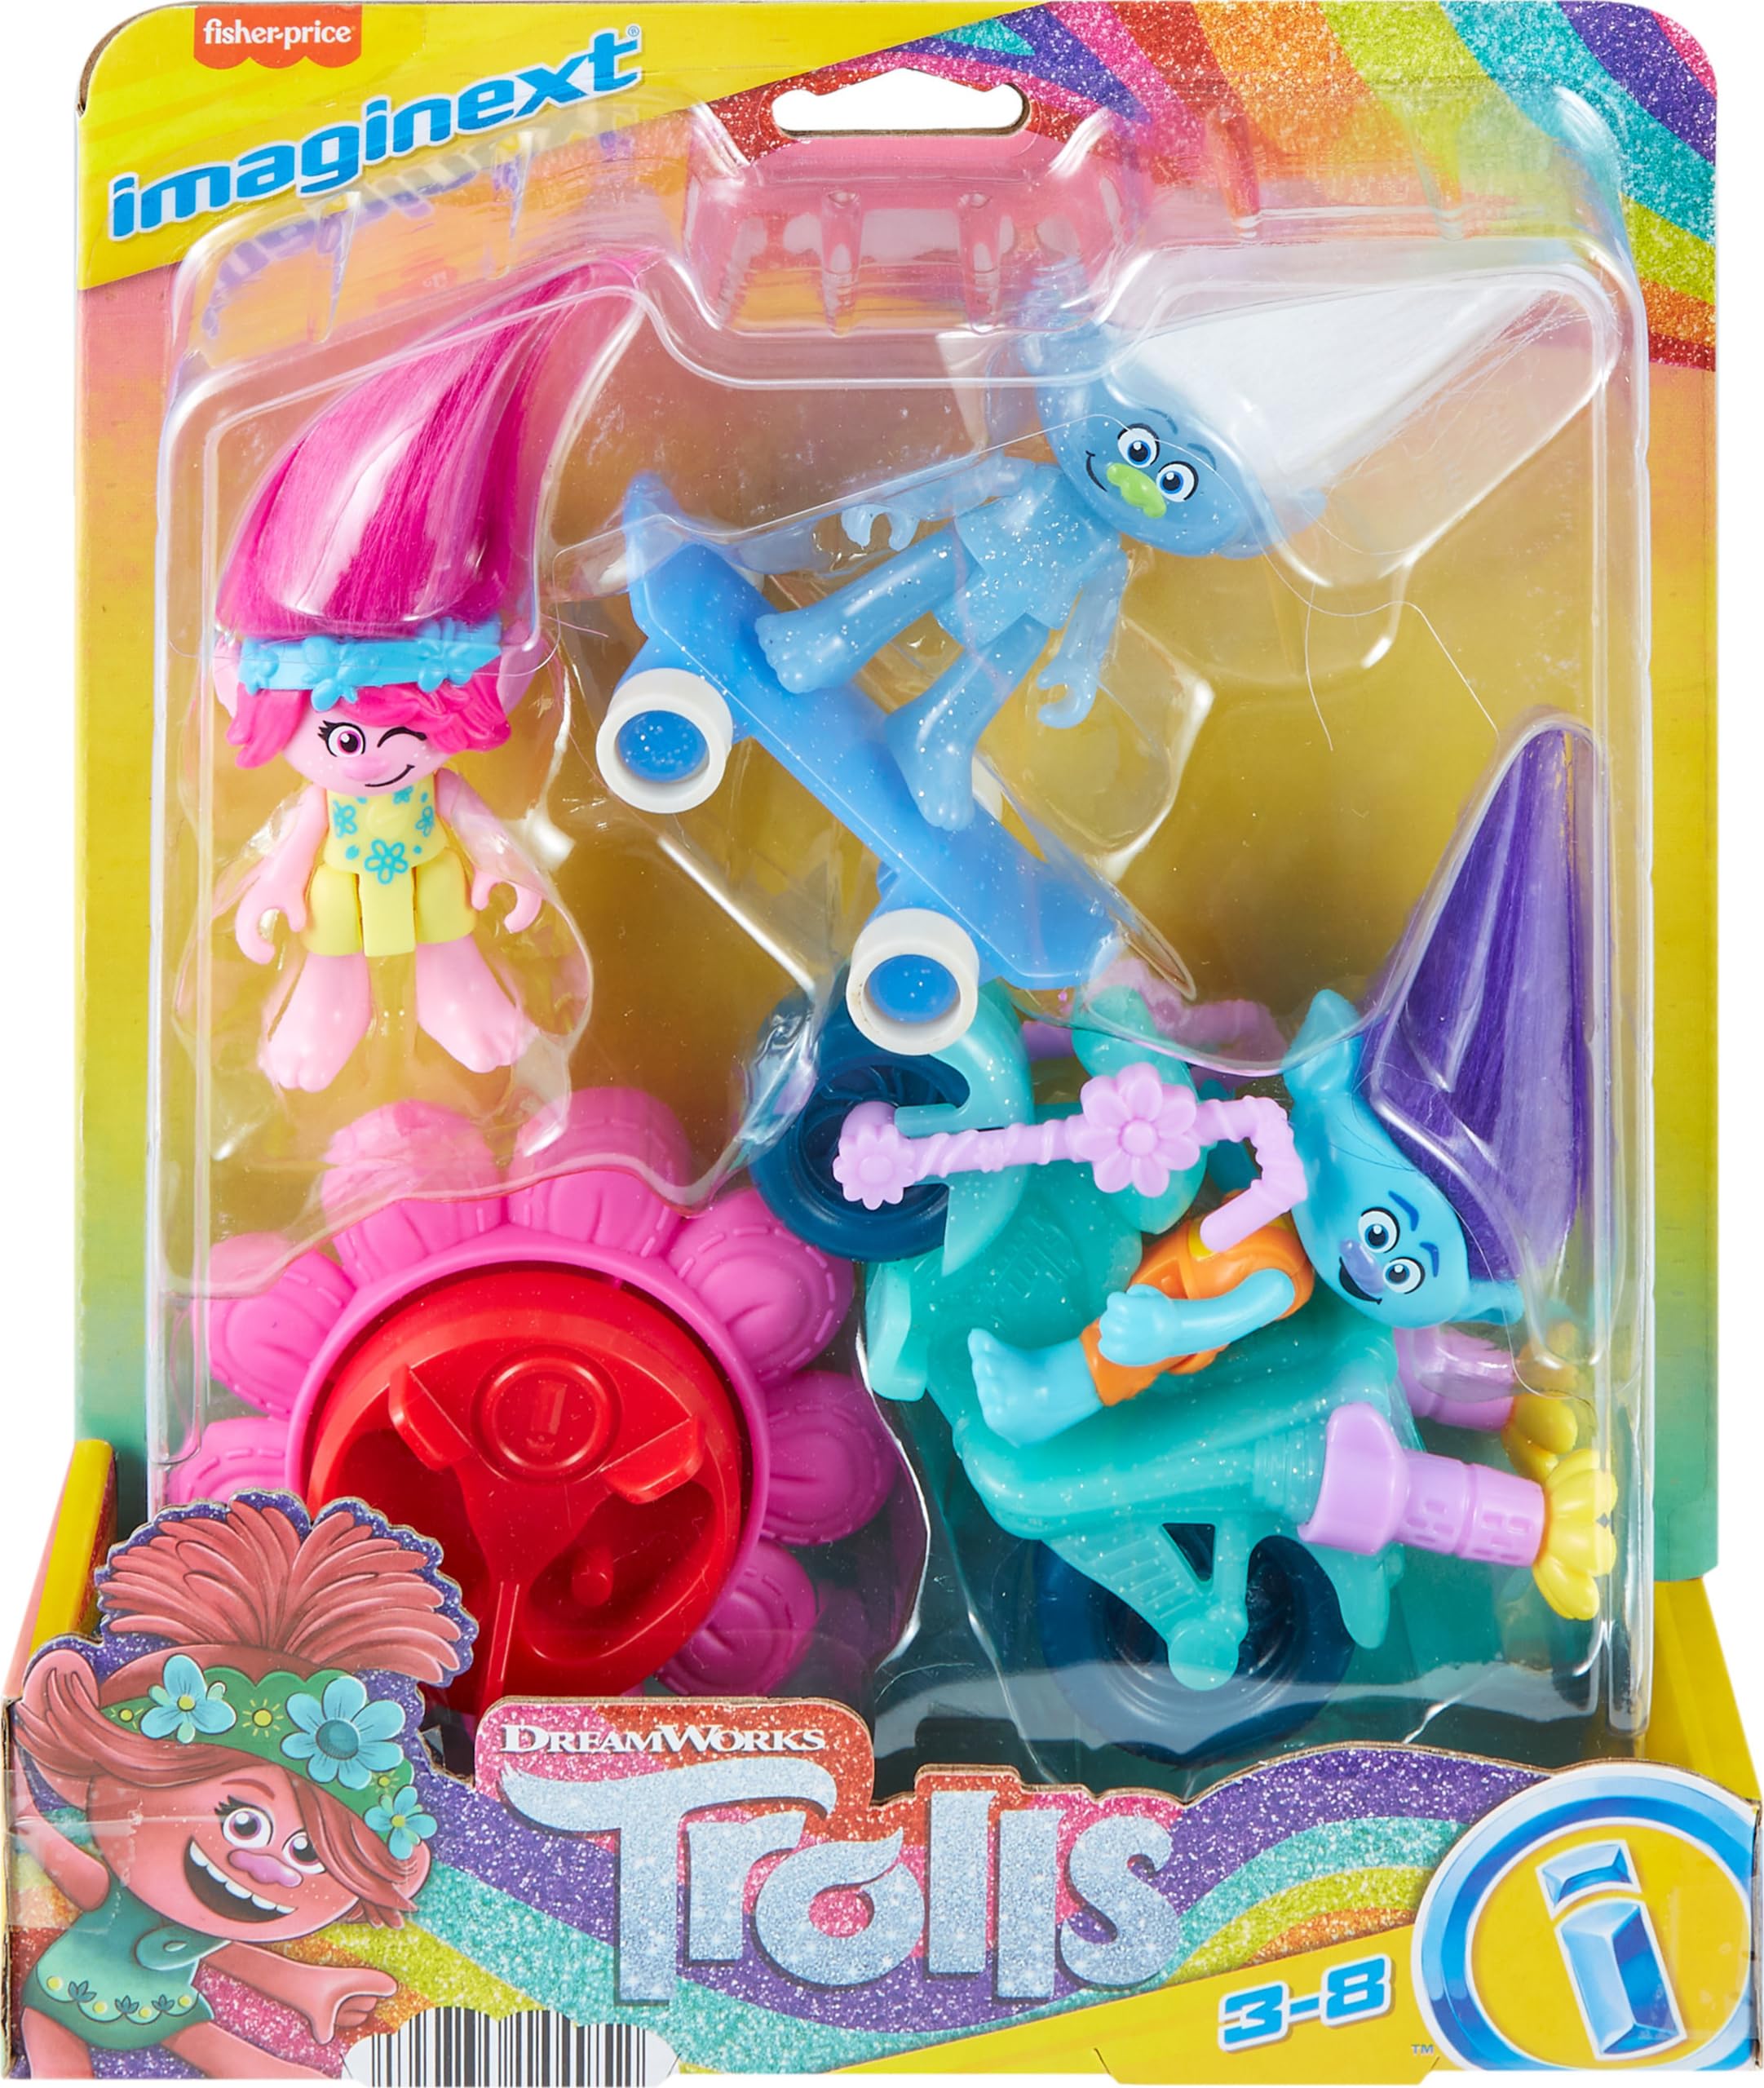 Fisher-Price Imaginext DreamWorks Trolls Toy Sparkle & Roll Pack, Poppy Branch and Guy Diamond Figures and Vehicles Set, Ages 3-8 Years